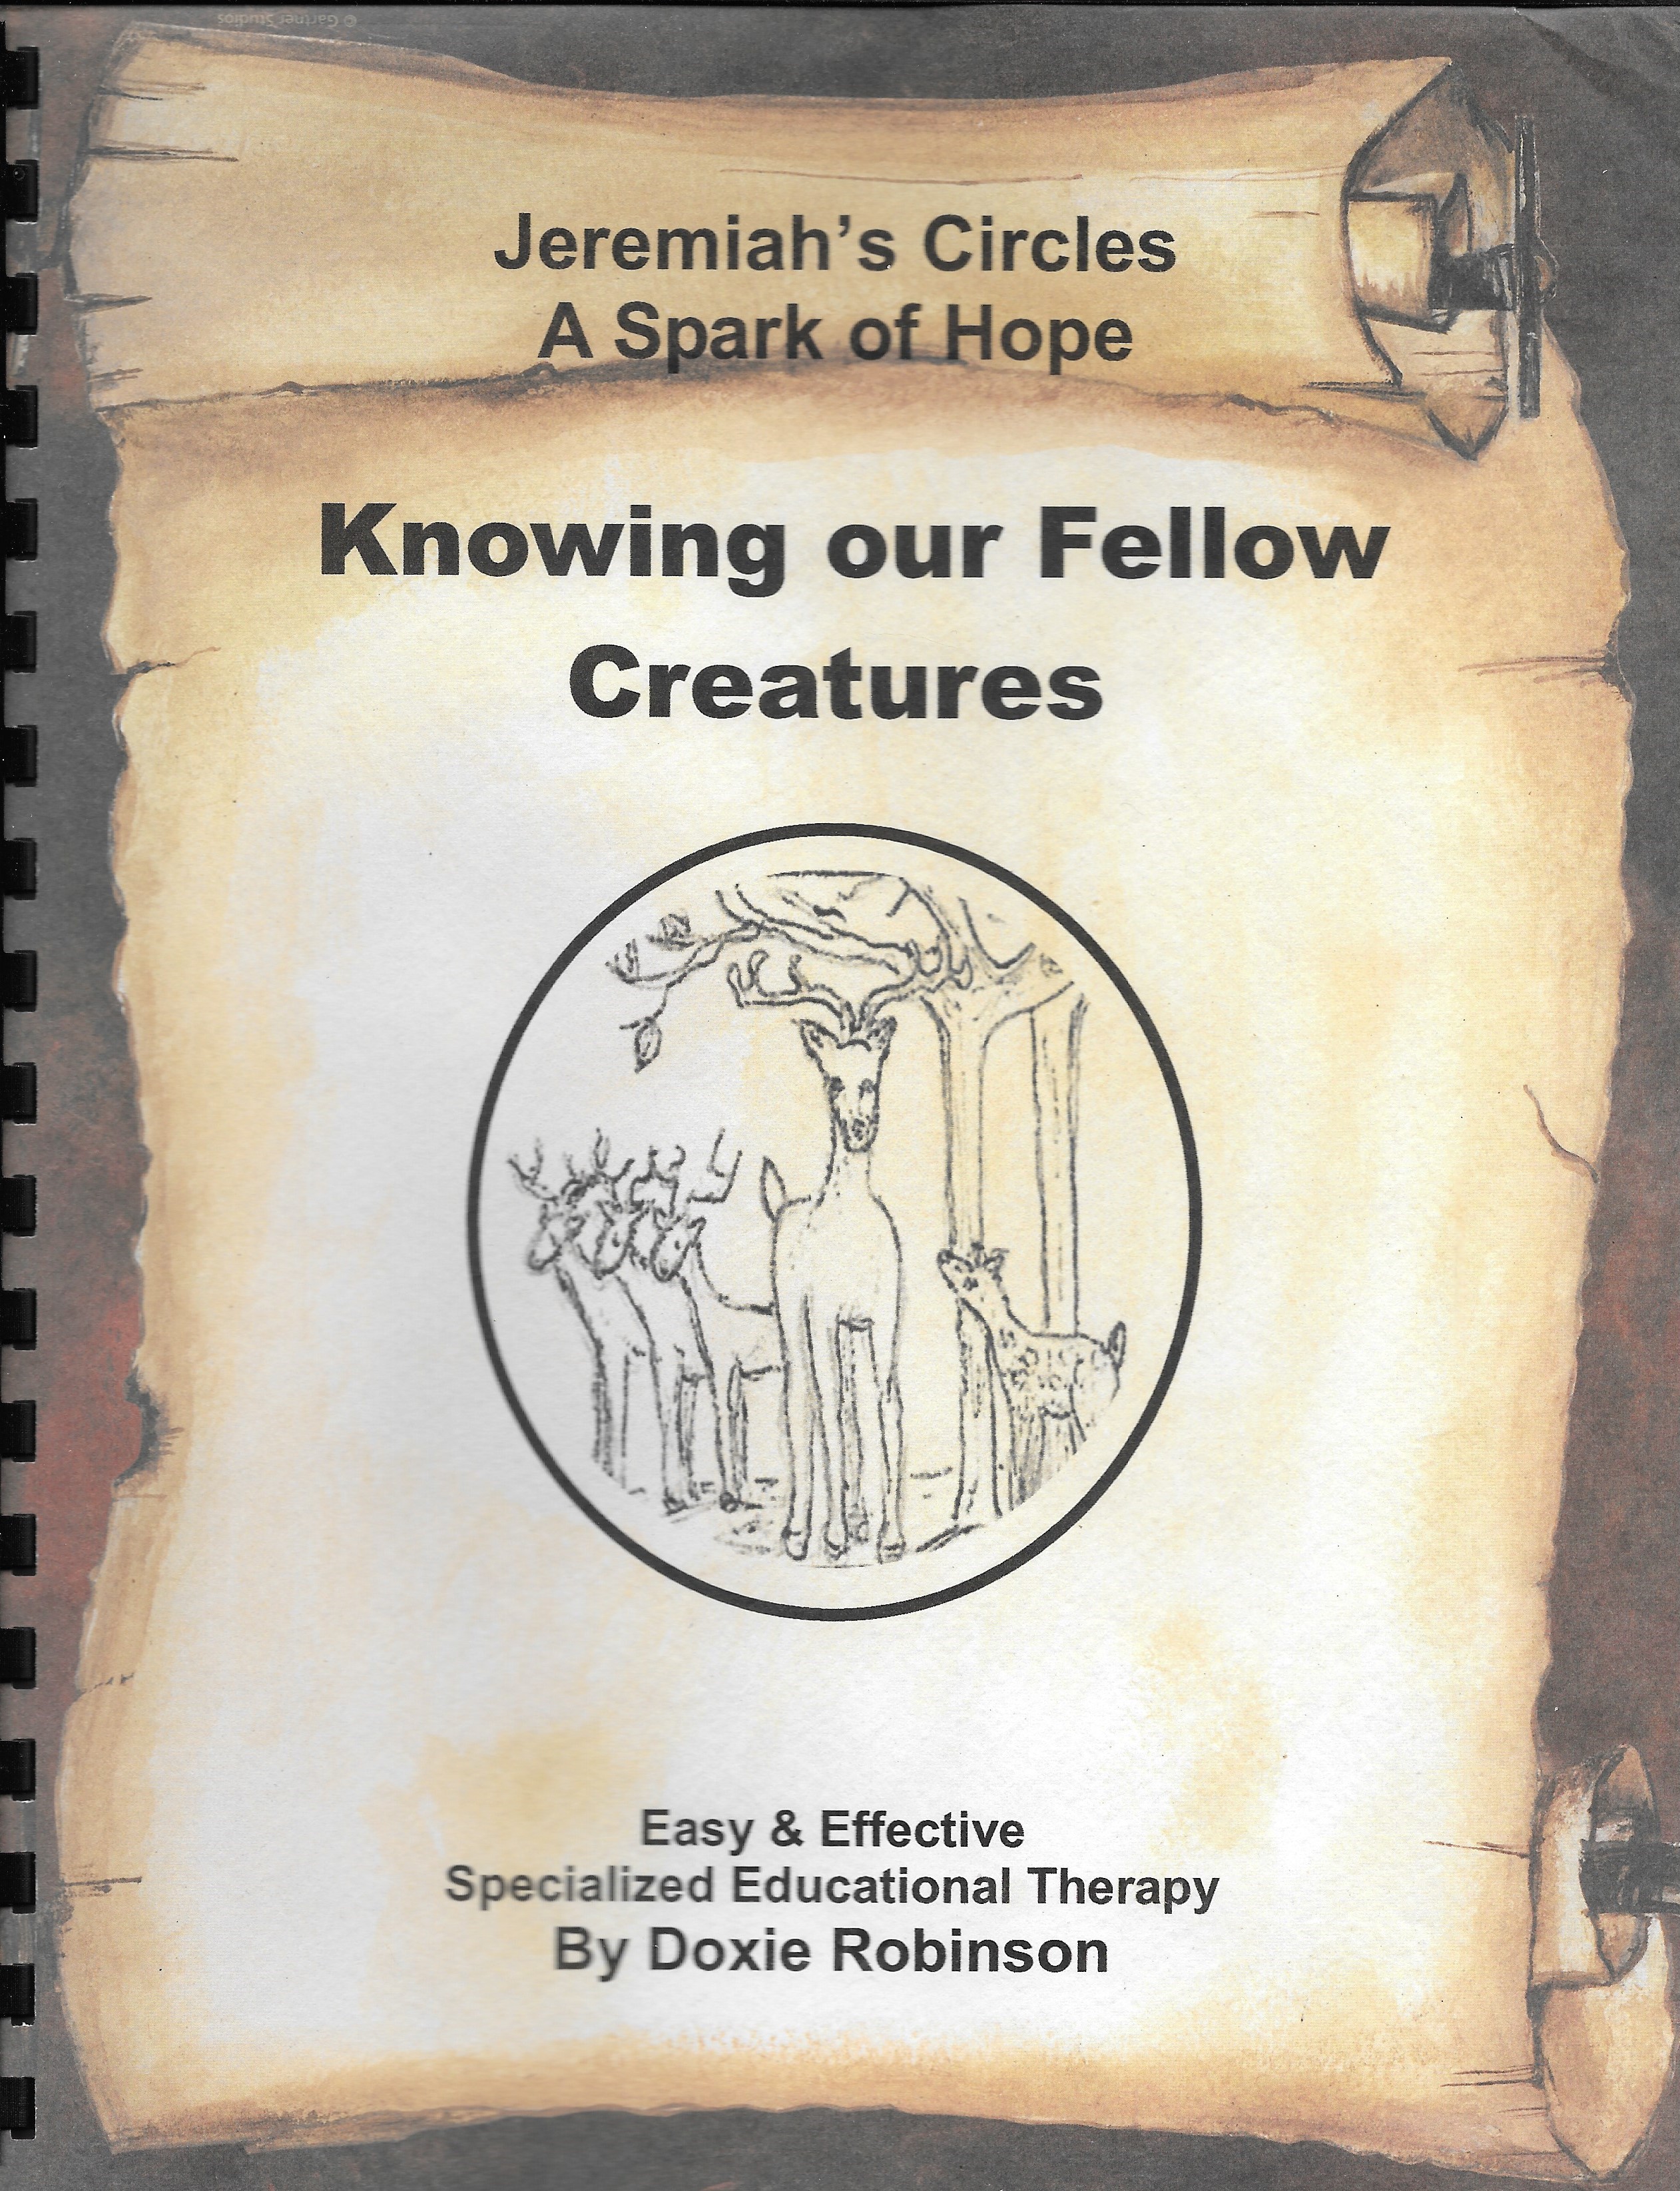 Academic Therapy - Knowing Creatures